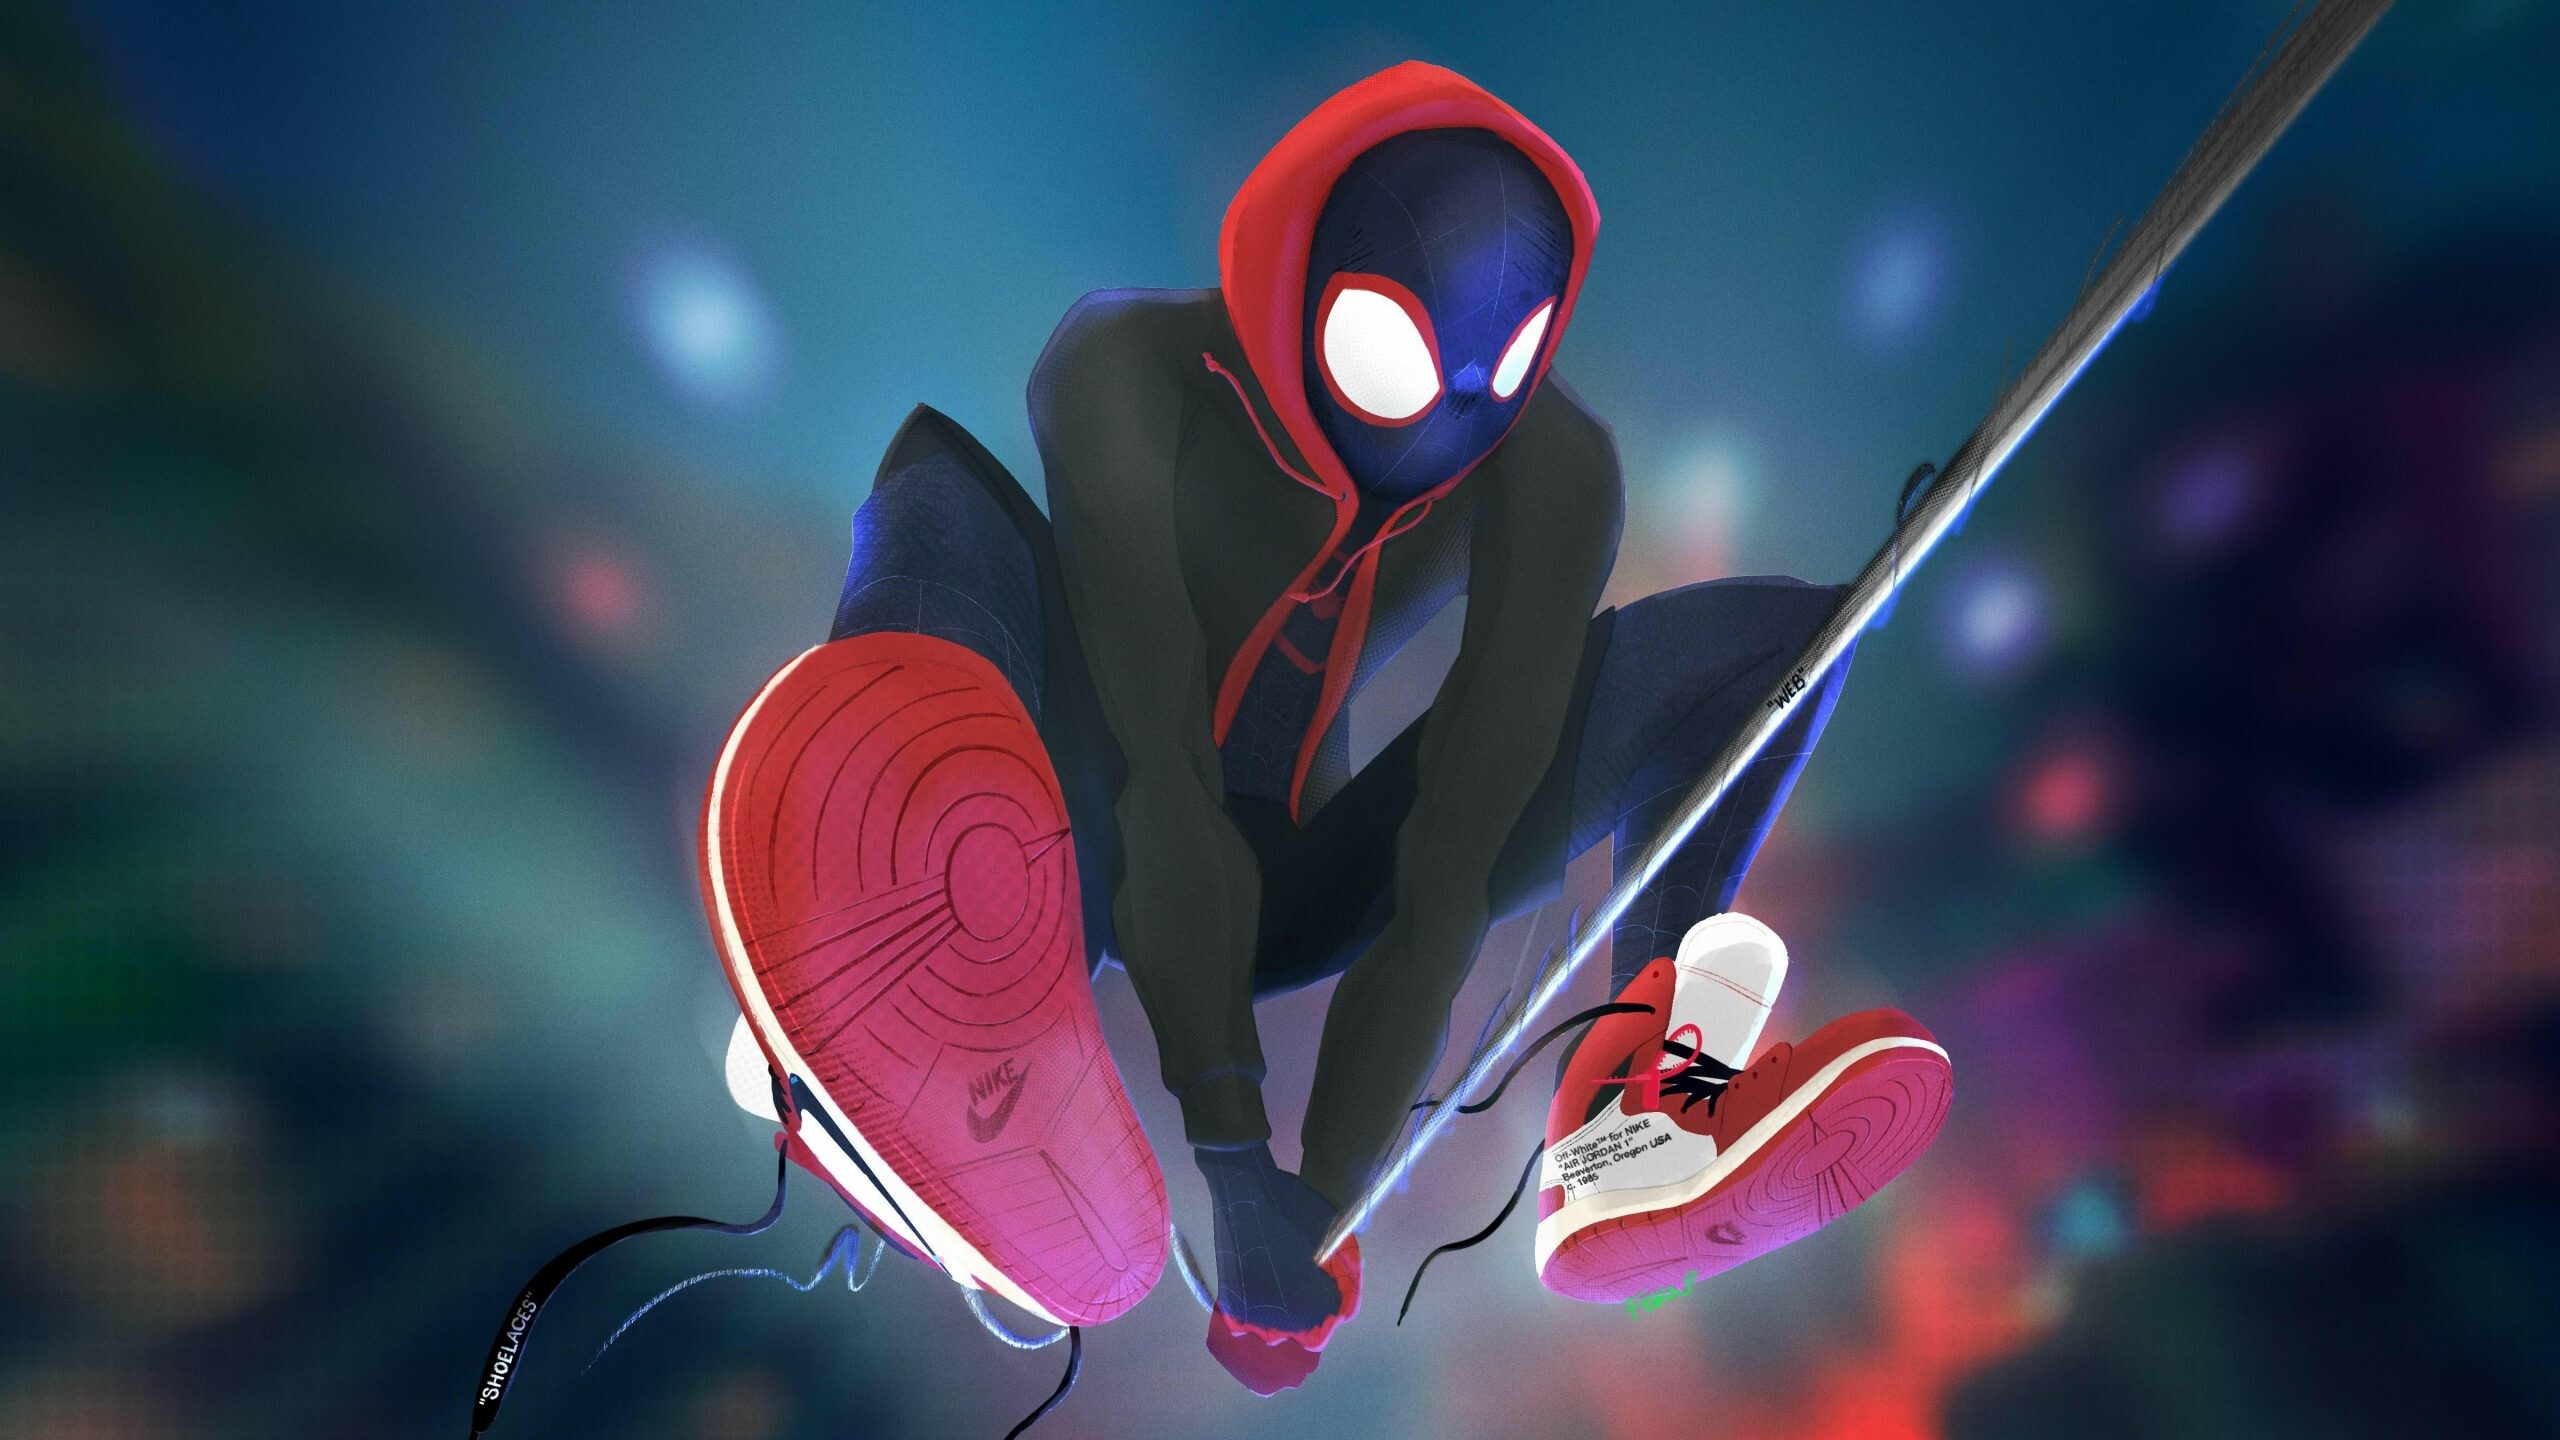 Spider-Man: Into the Spider-Verse: Miles Morales, was bitten by a genetically-altered spider similar to Peter Parker himself. 2560x1440 HD Wallpaper.